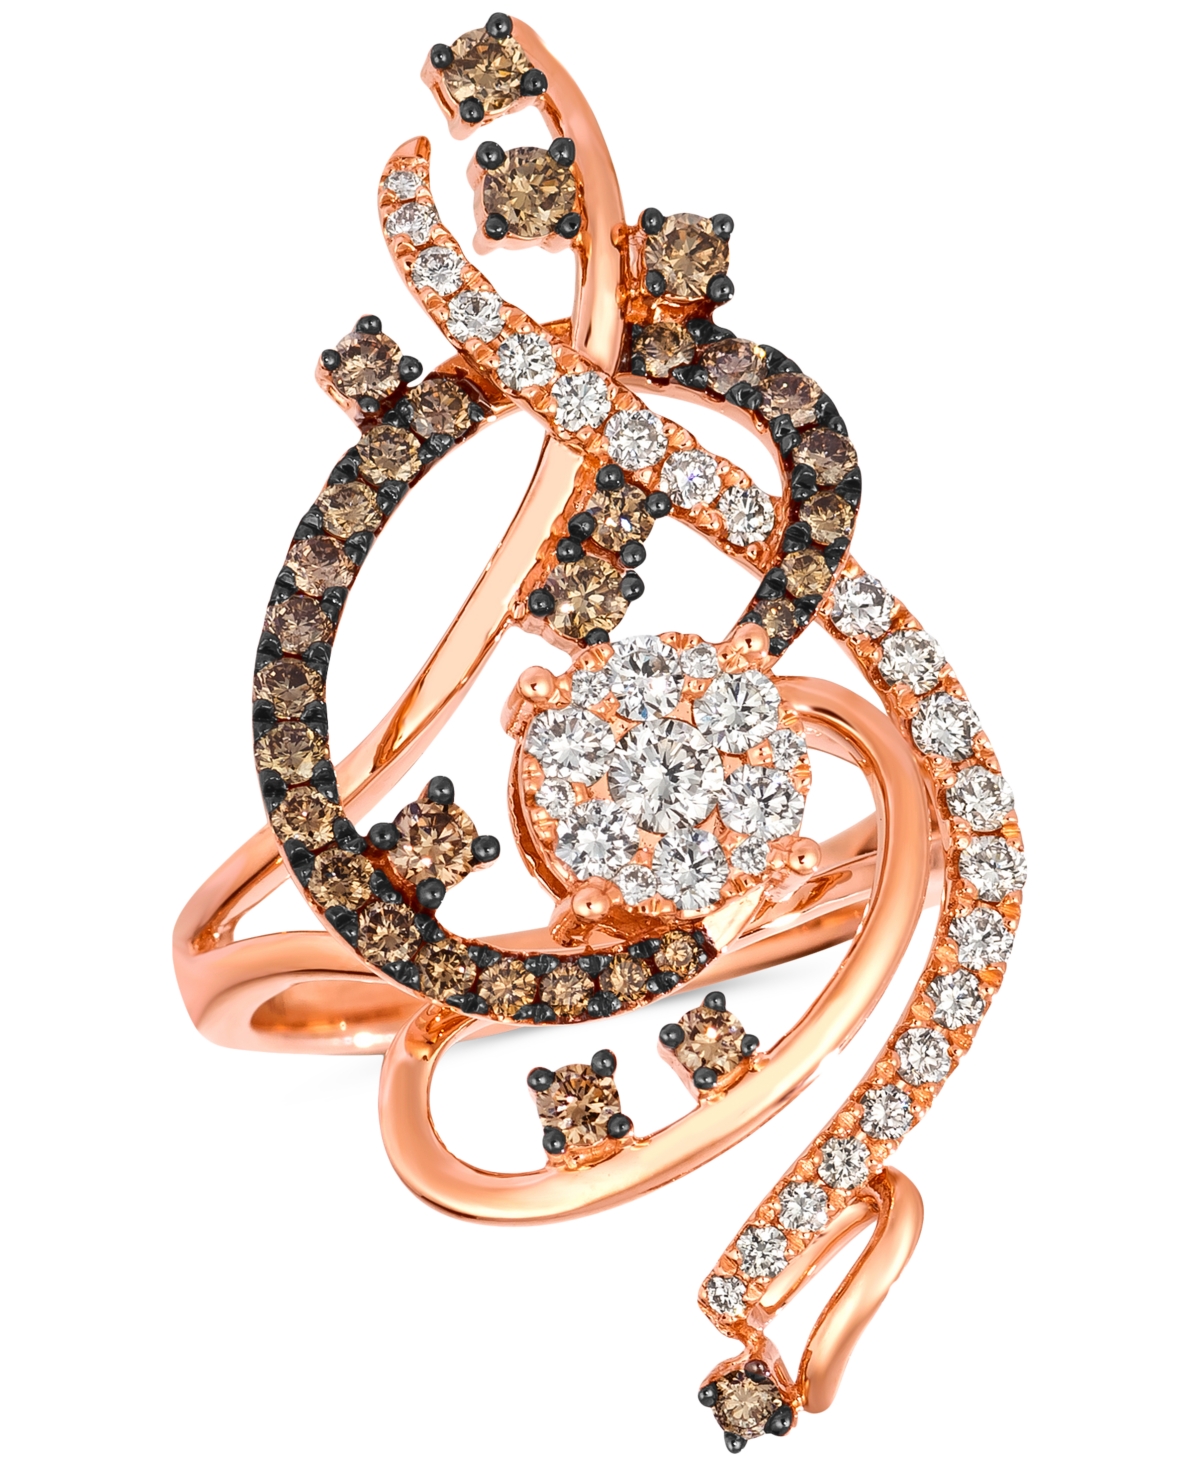 Crazy Collection Chocolate Diamond & Nude Diamond Swirl Statement Ring (1-1/2 ct. t.w.) in 14k Rose Gold